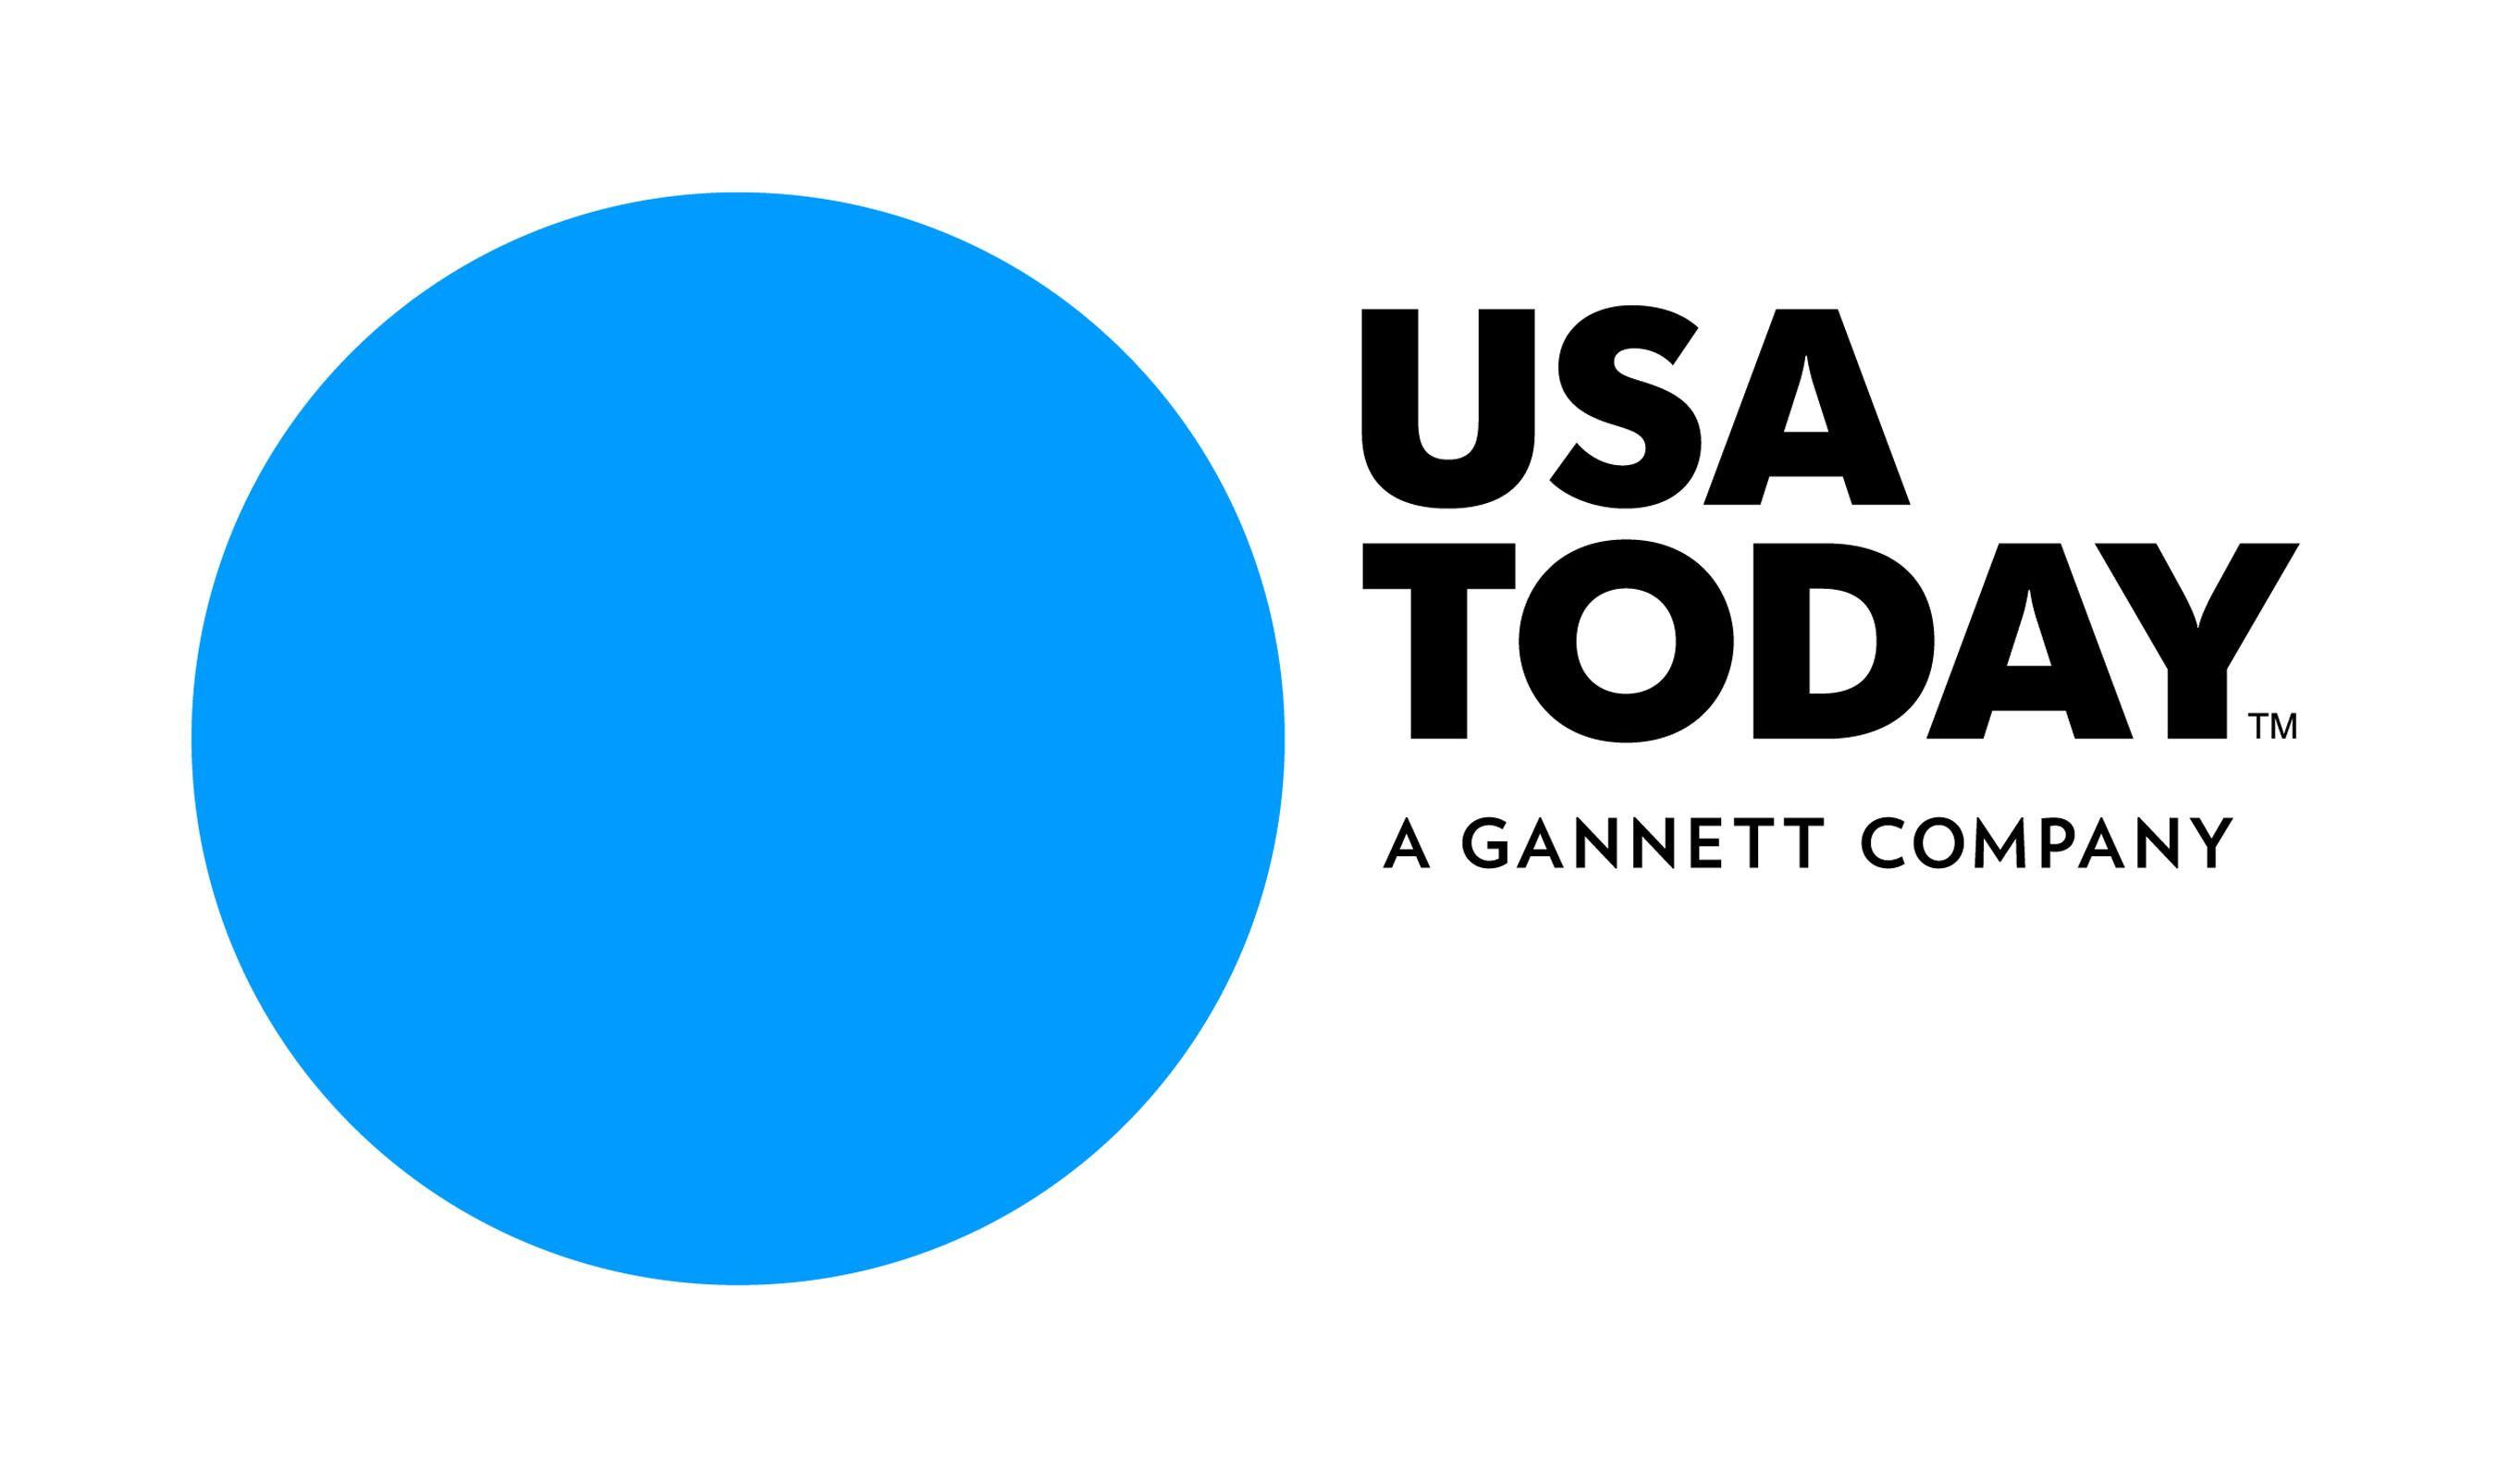 NewsApp Logo - USA TODAY Introduces First-Ever Customized Campus News App